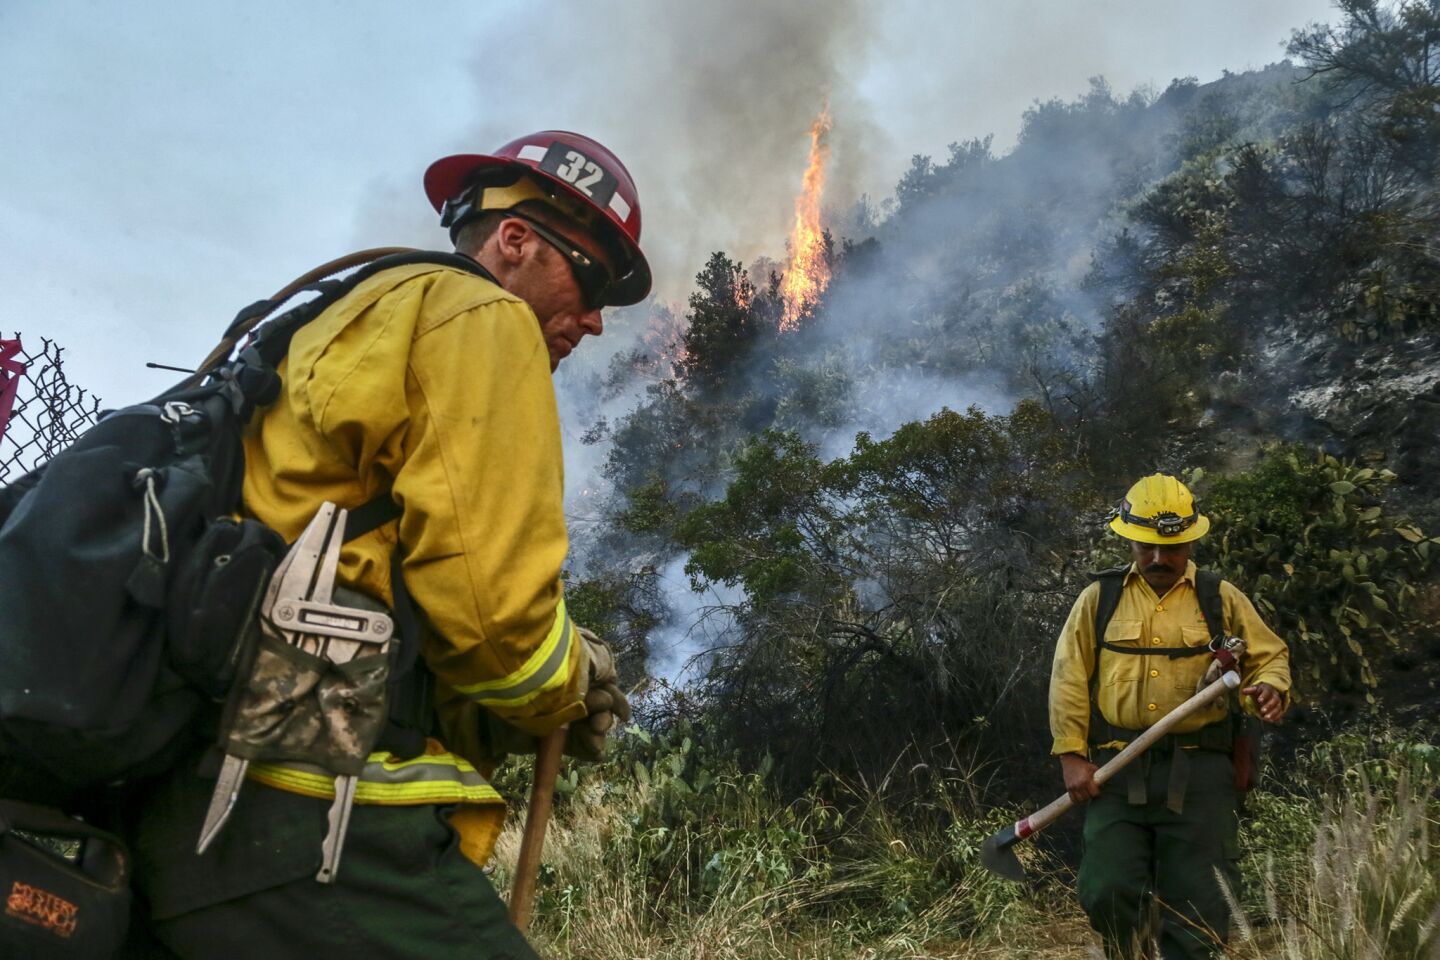 U.S. Forest Service firefighters Chris Calomino, left, and Pedro Barba are on fire watch at the 3200 block of Brookridge Road as the Fish fire burns above the hills in Duarte on Tuesday morning.